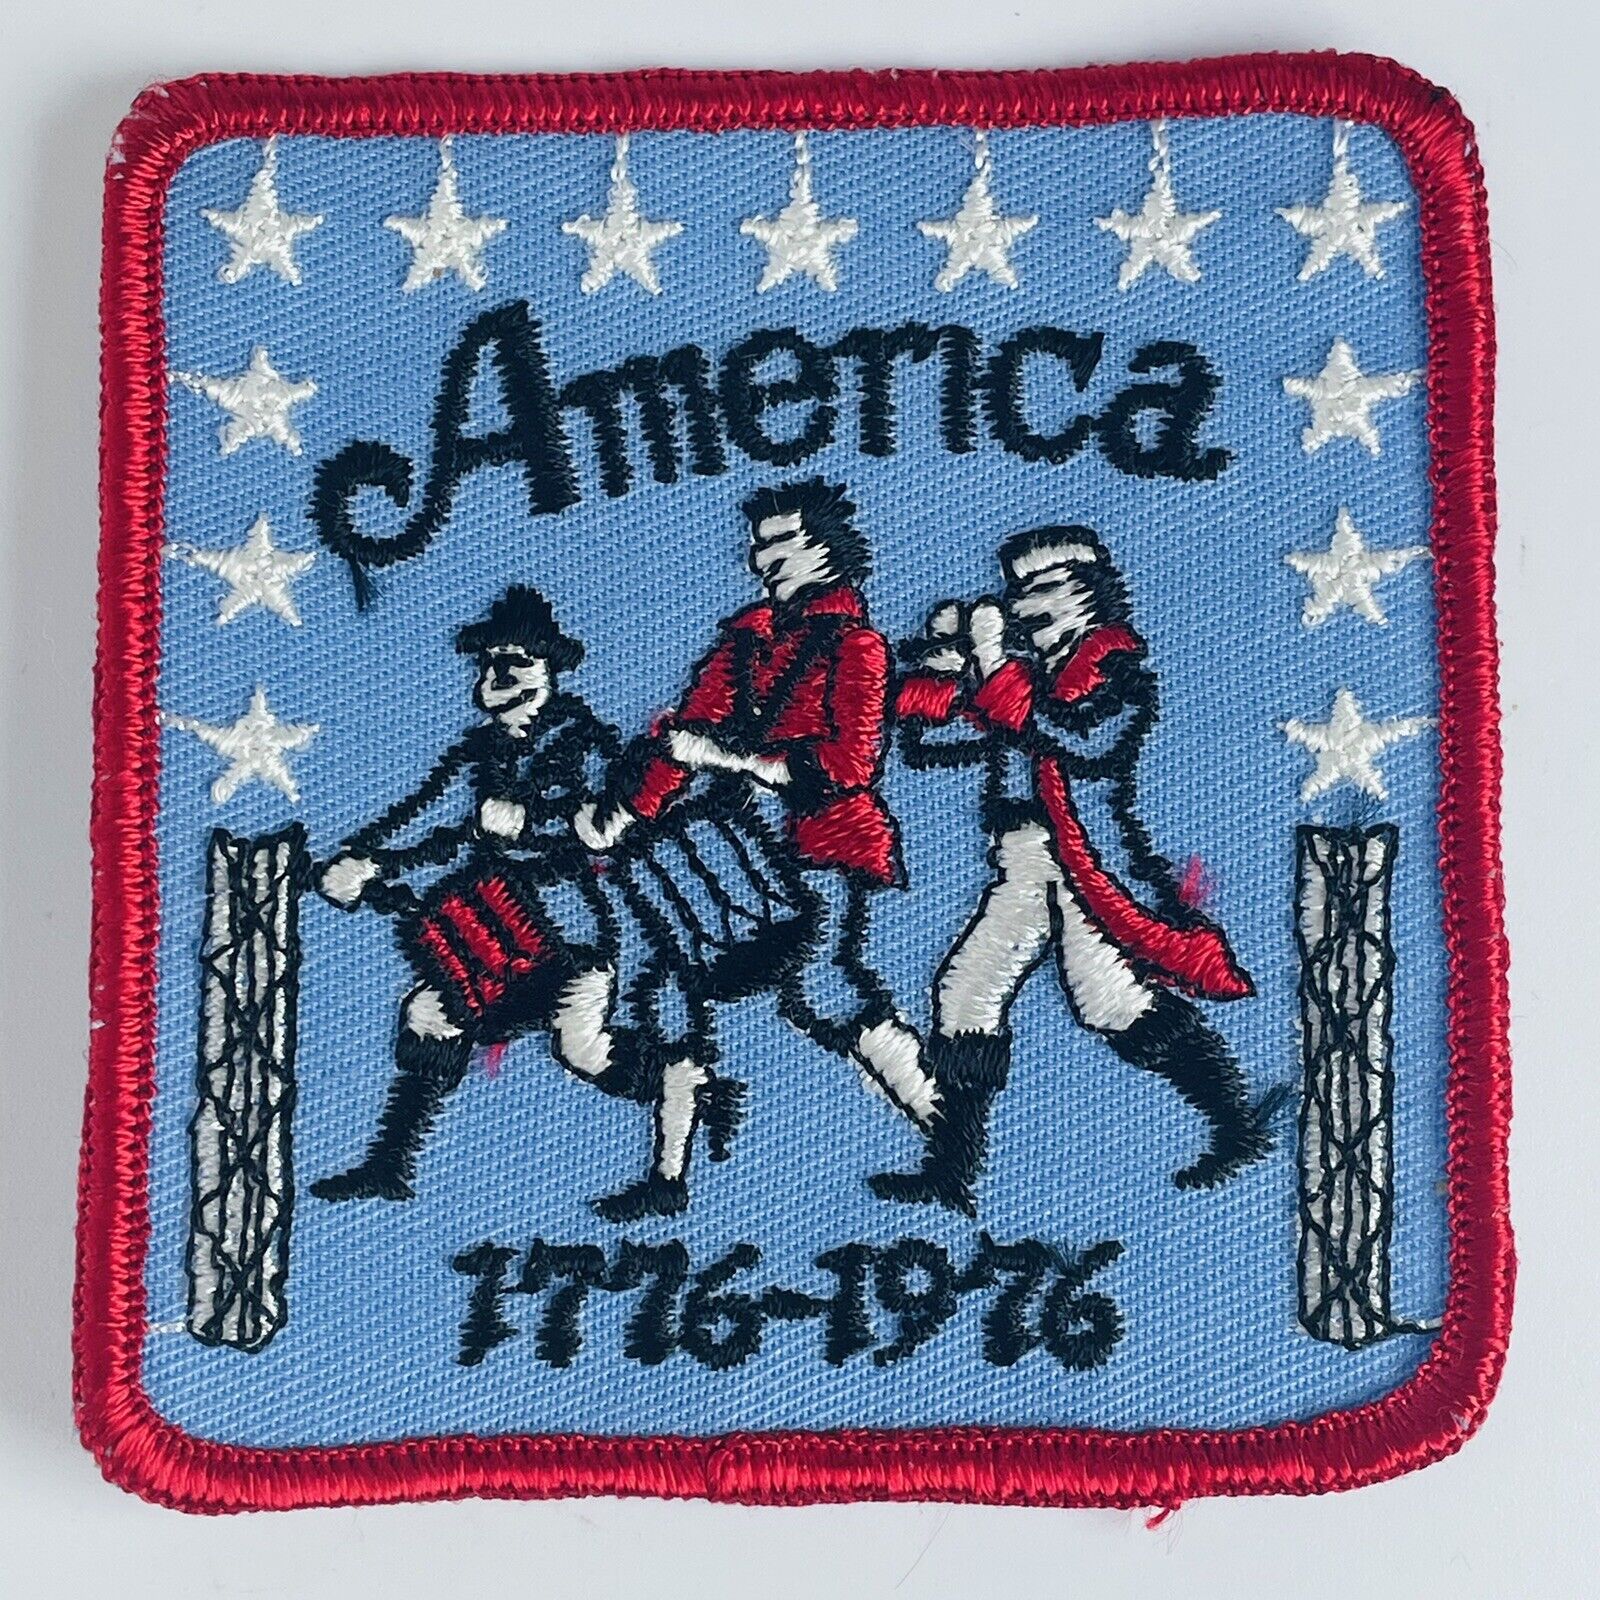 America Bicentennial Embroidered Patch USA Patriotic 1776-1976 VTG Yankee Doodle